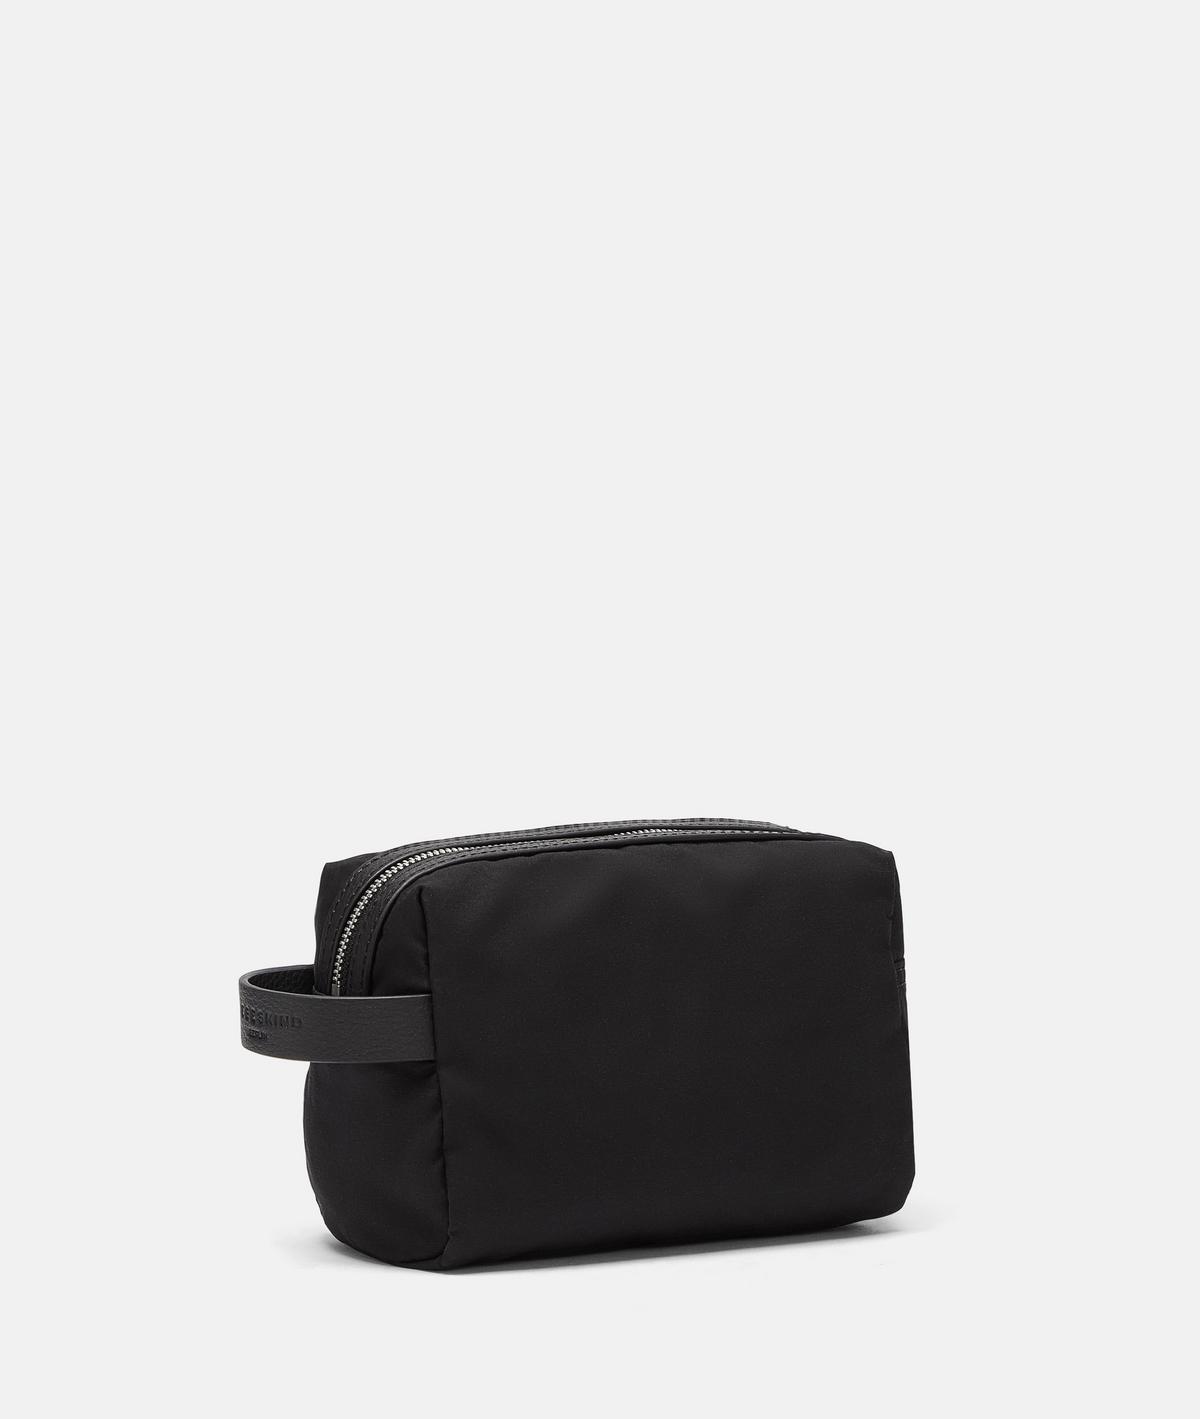 LIEBESKIND BERLIN Cosmetic Pouch S